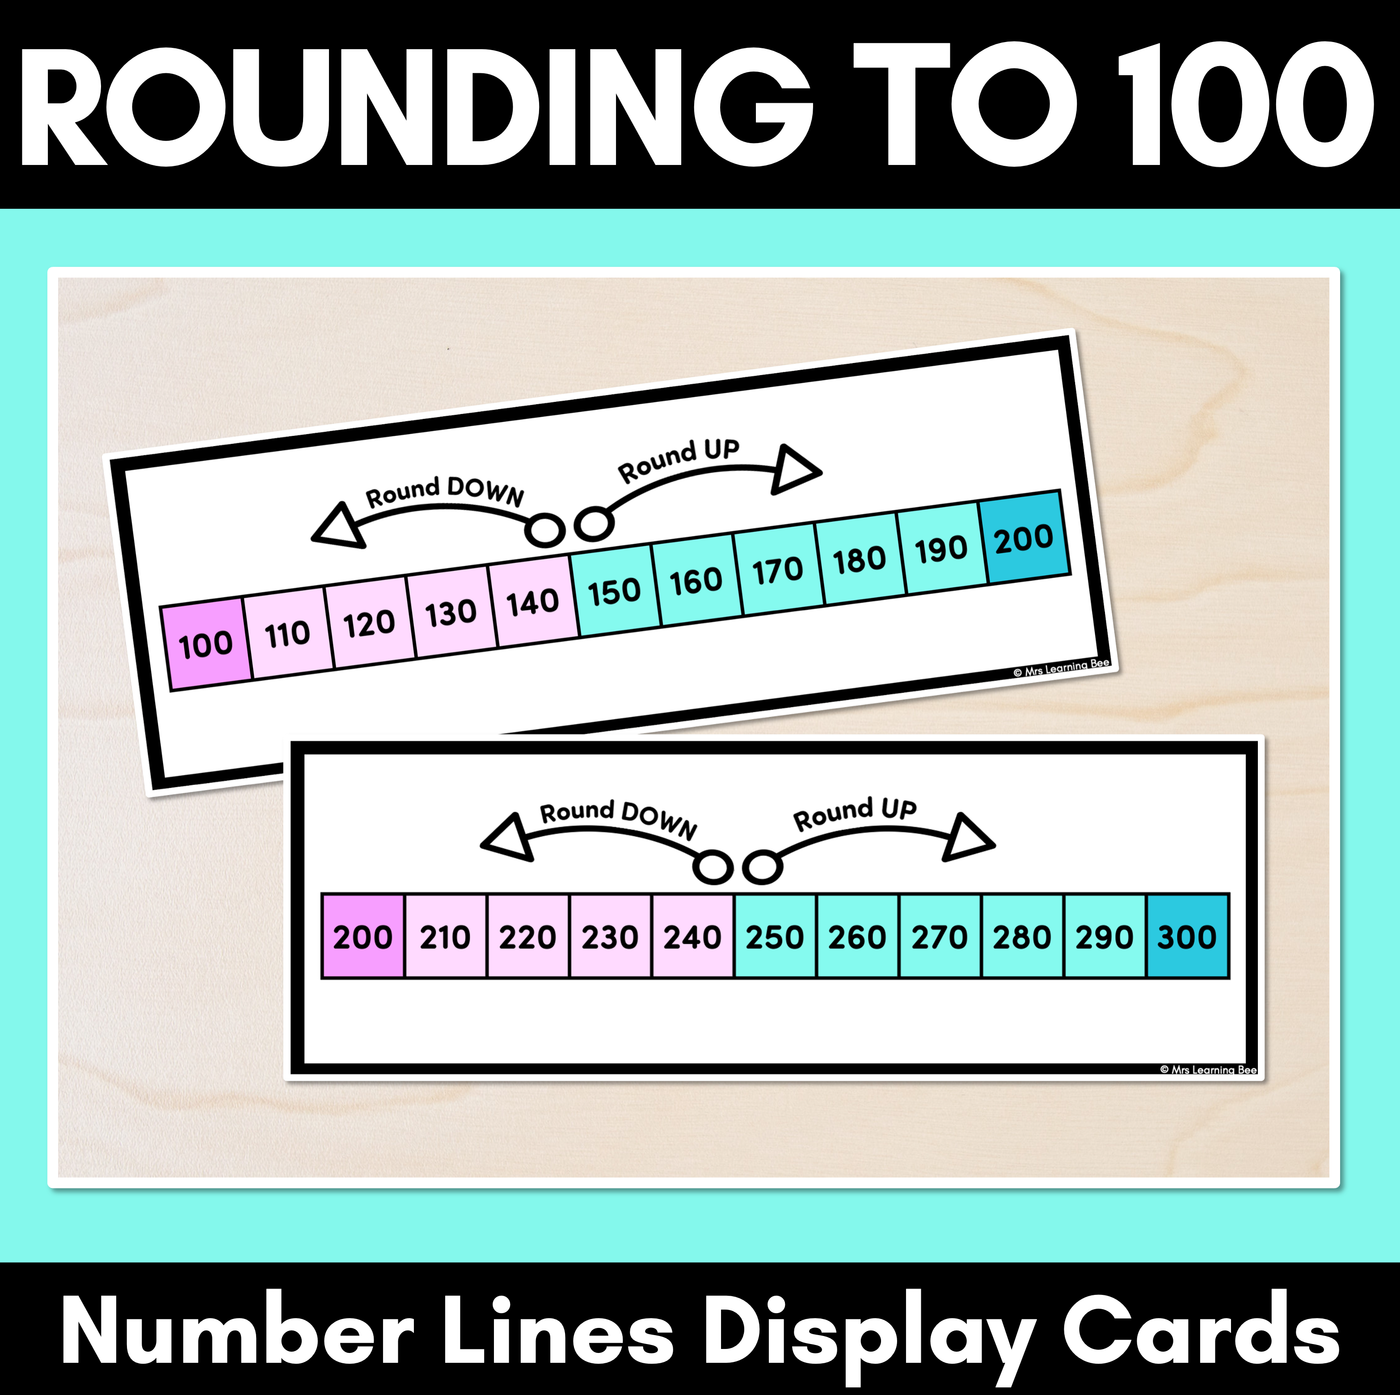 Rounding to 100 - Number Lines Display Cards & Desk Companions